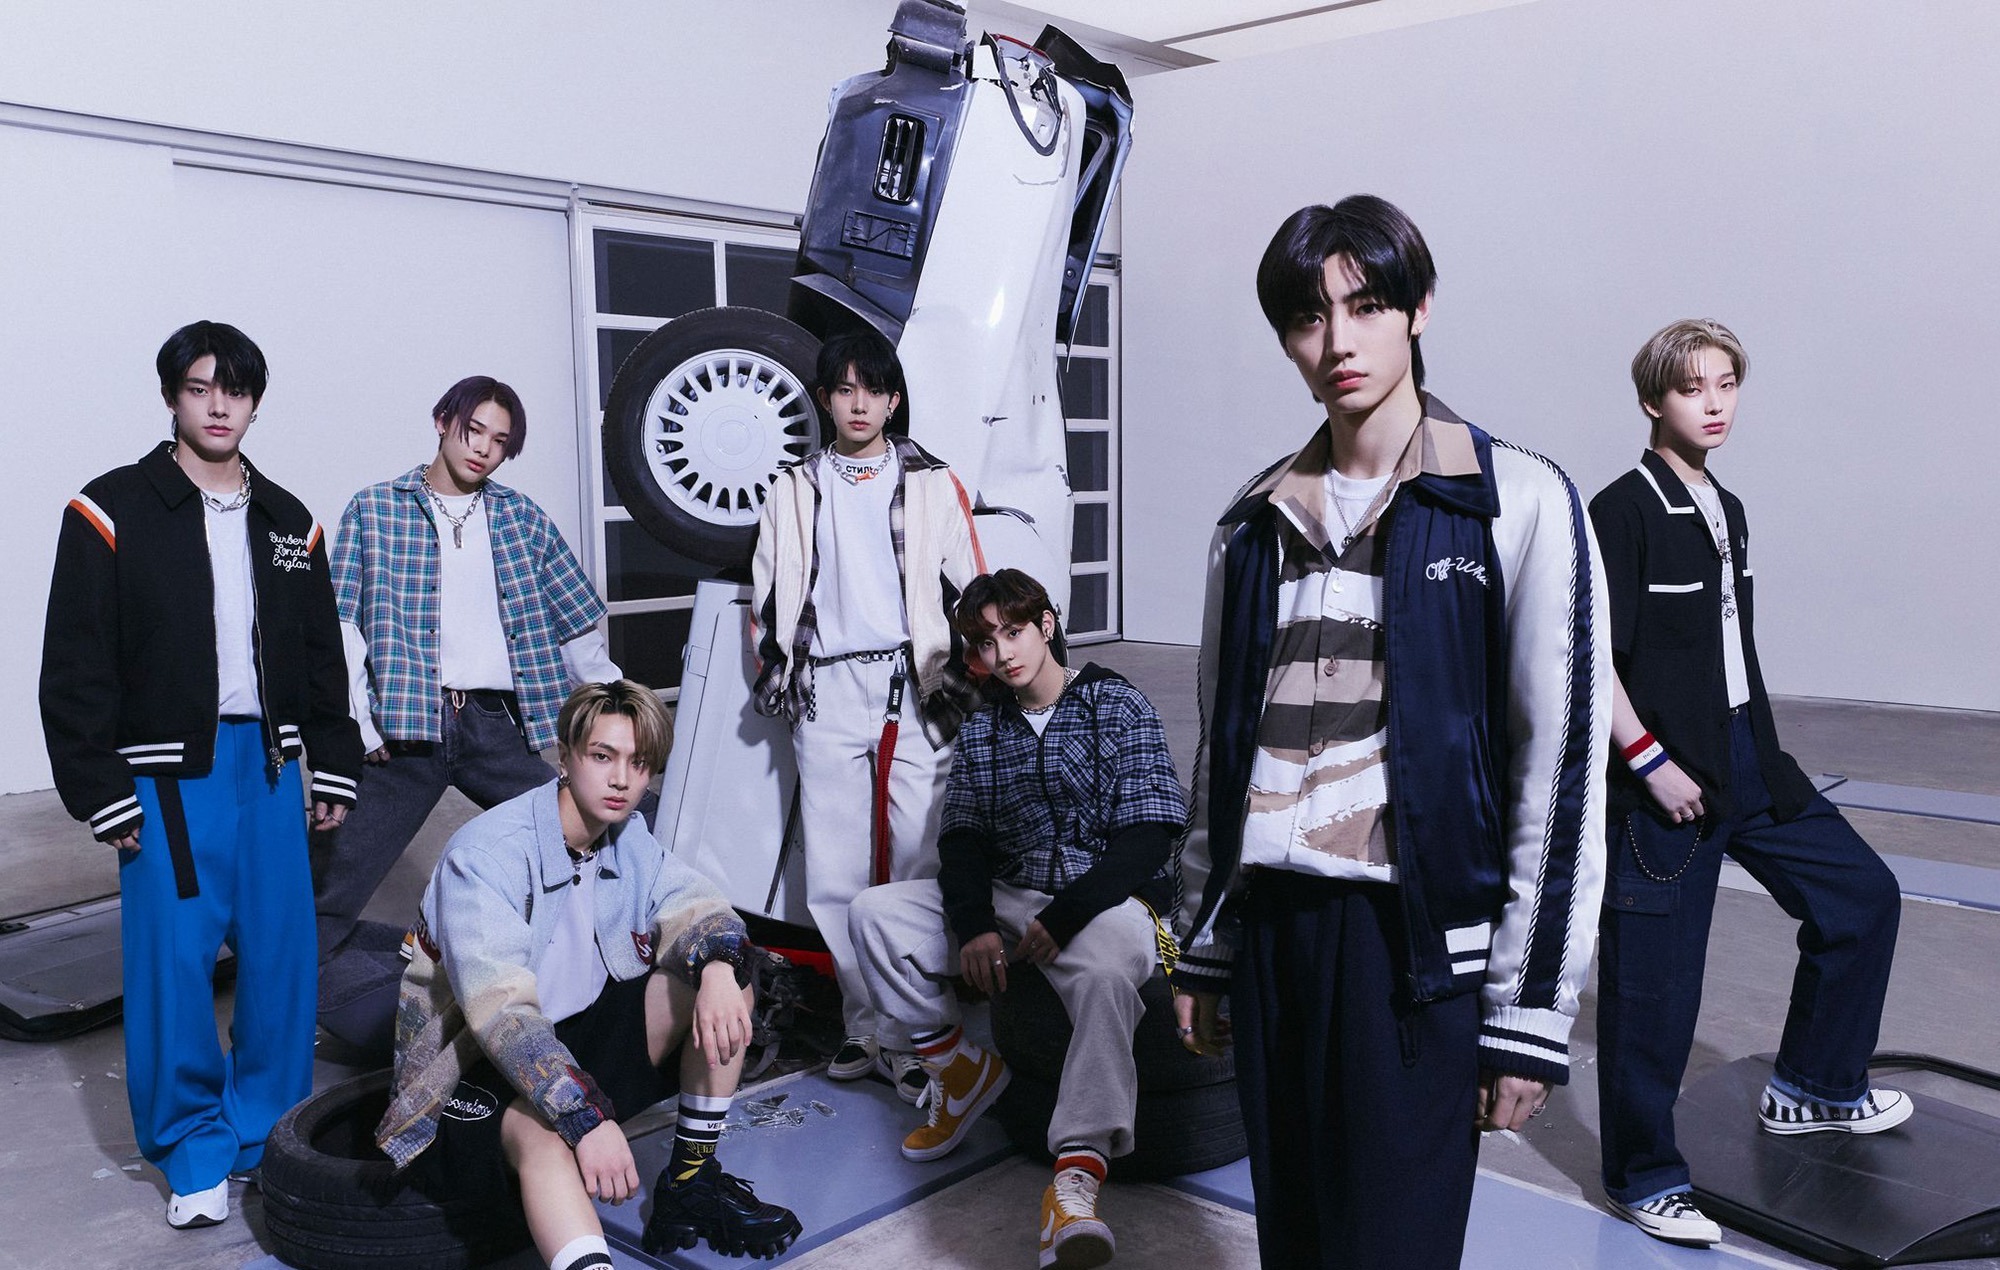 ENHYPEN: “We’re determined to become ‘the’ destination for K-pop fans around the world”